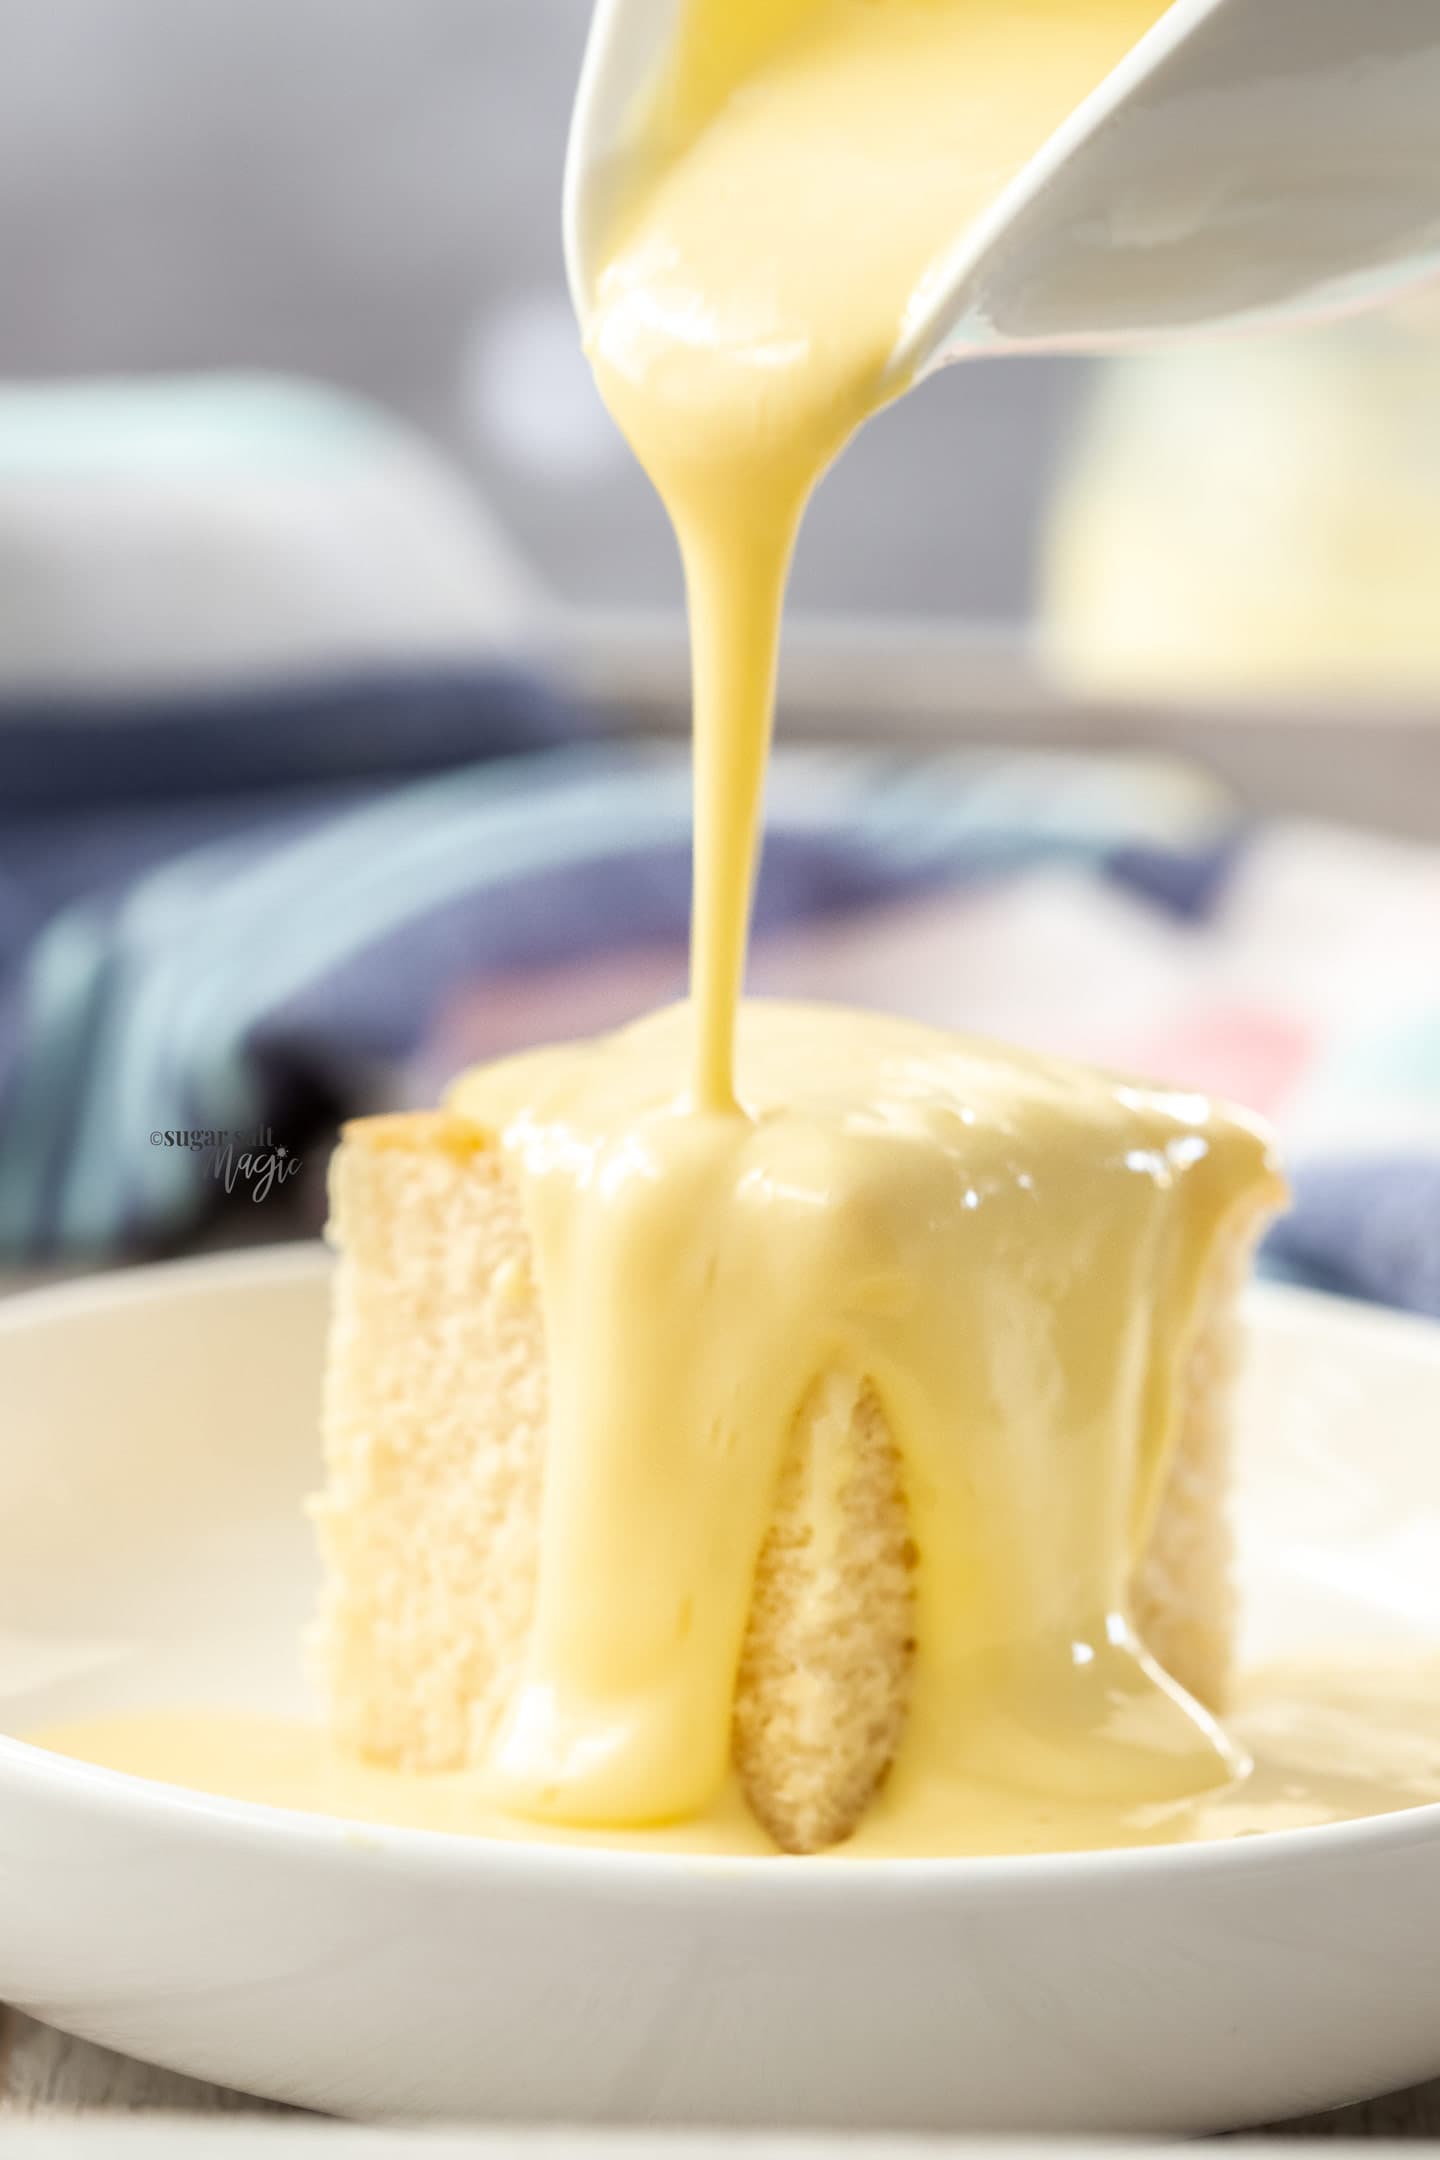 Custard being poured over a piece of cake.